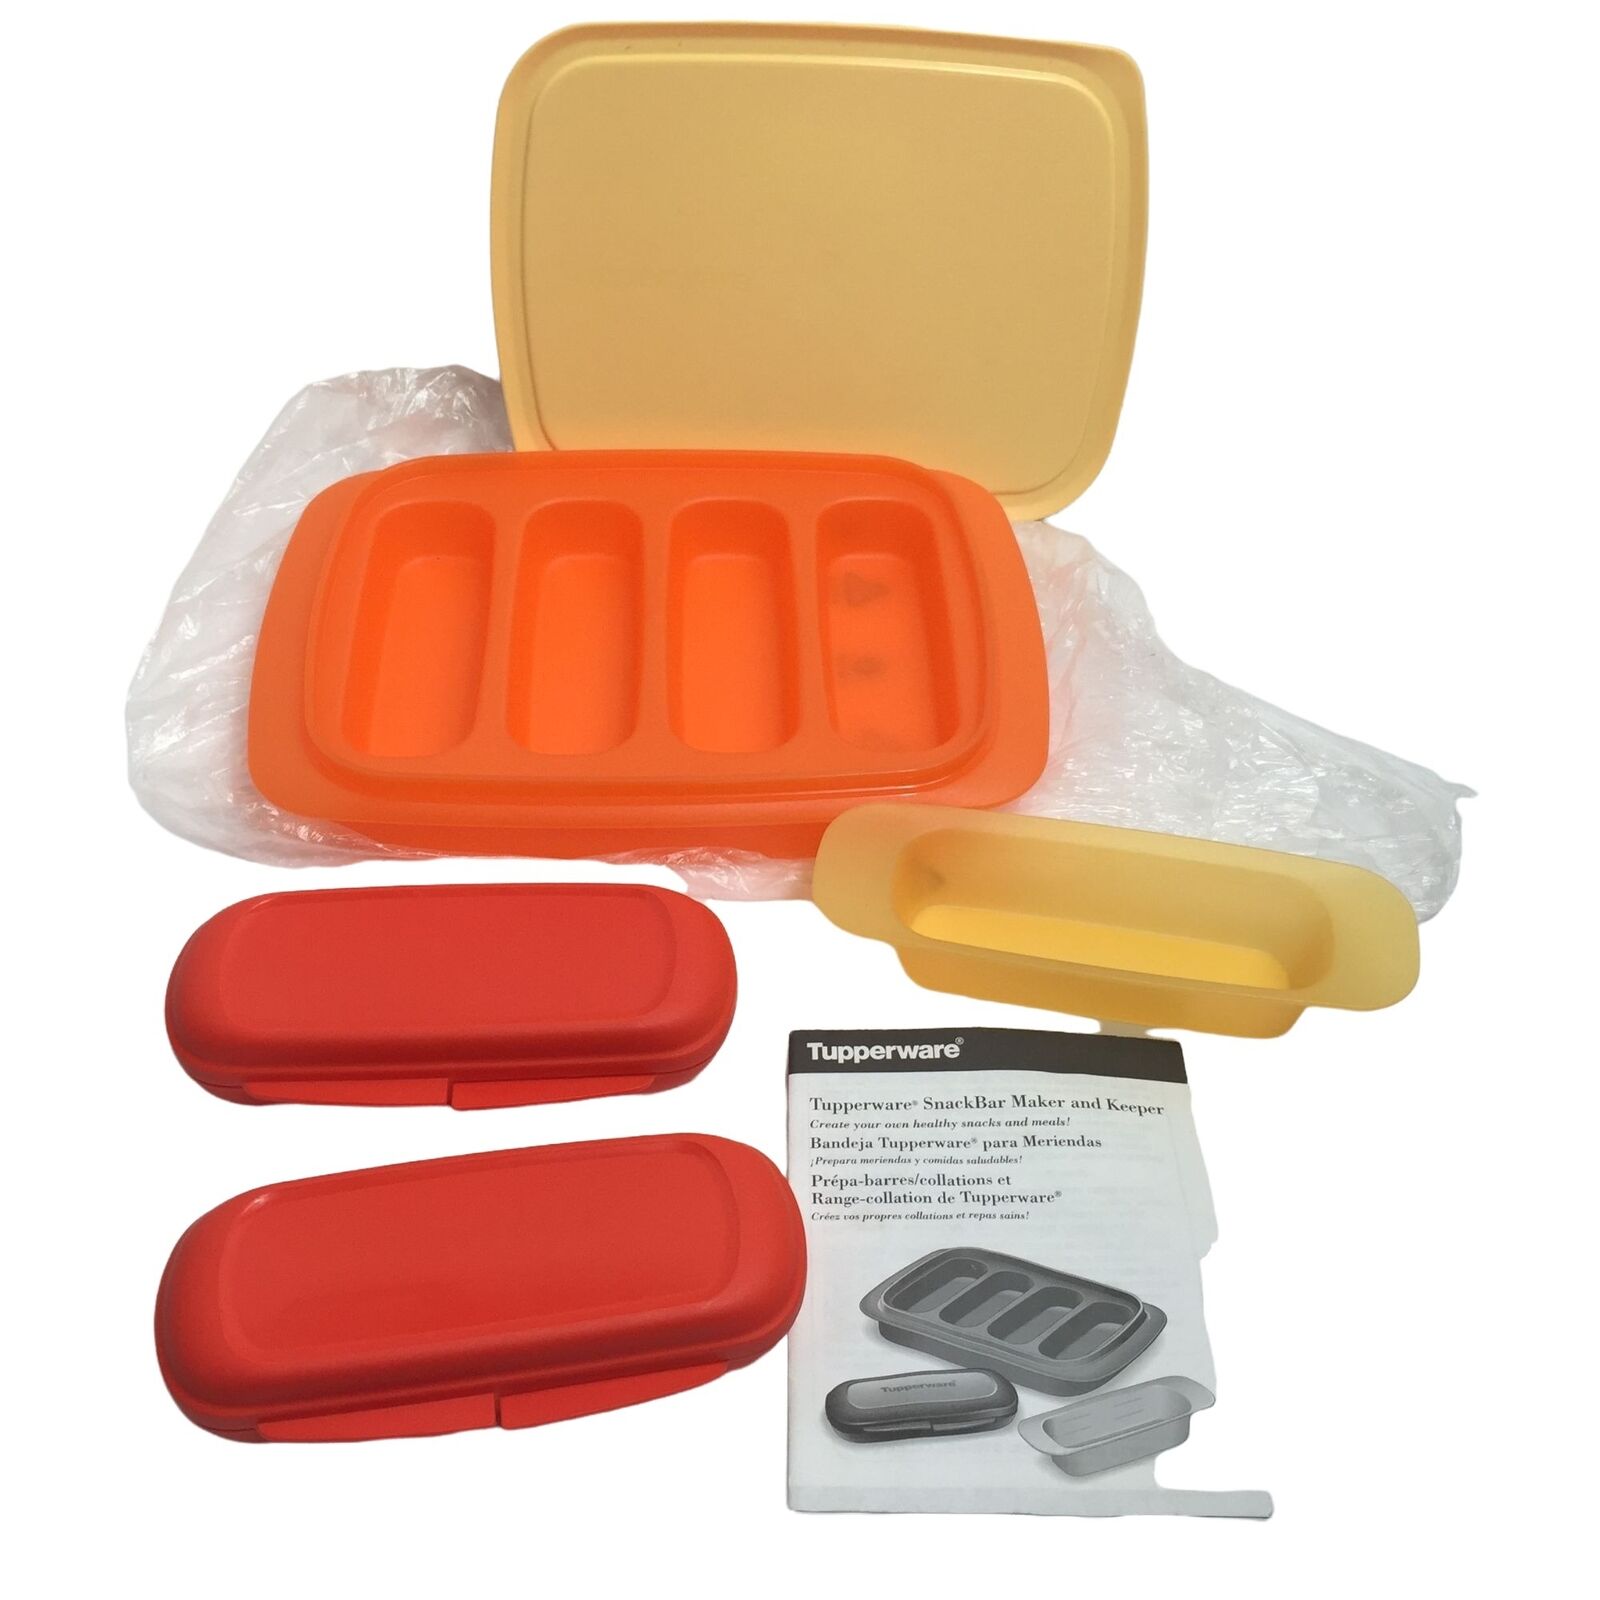 NEW Tupperware Granola Snack Bar Maker & Keepers Orange and Yellow